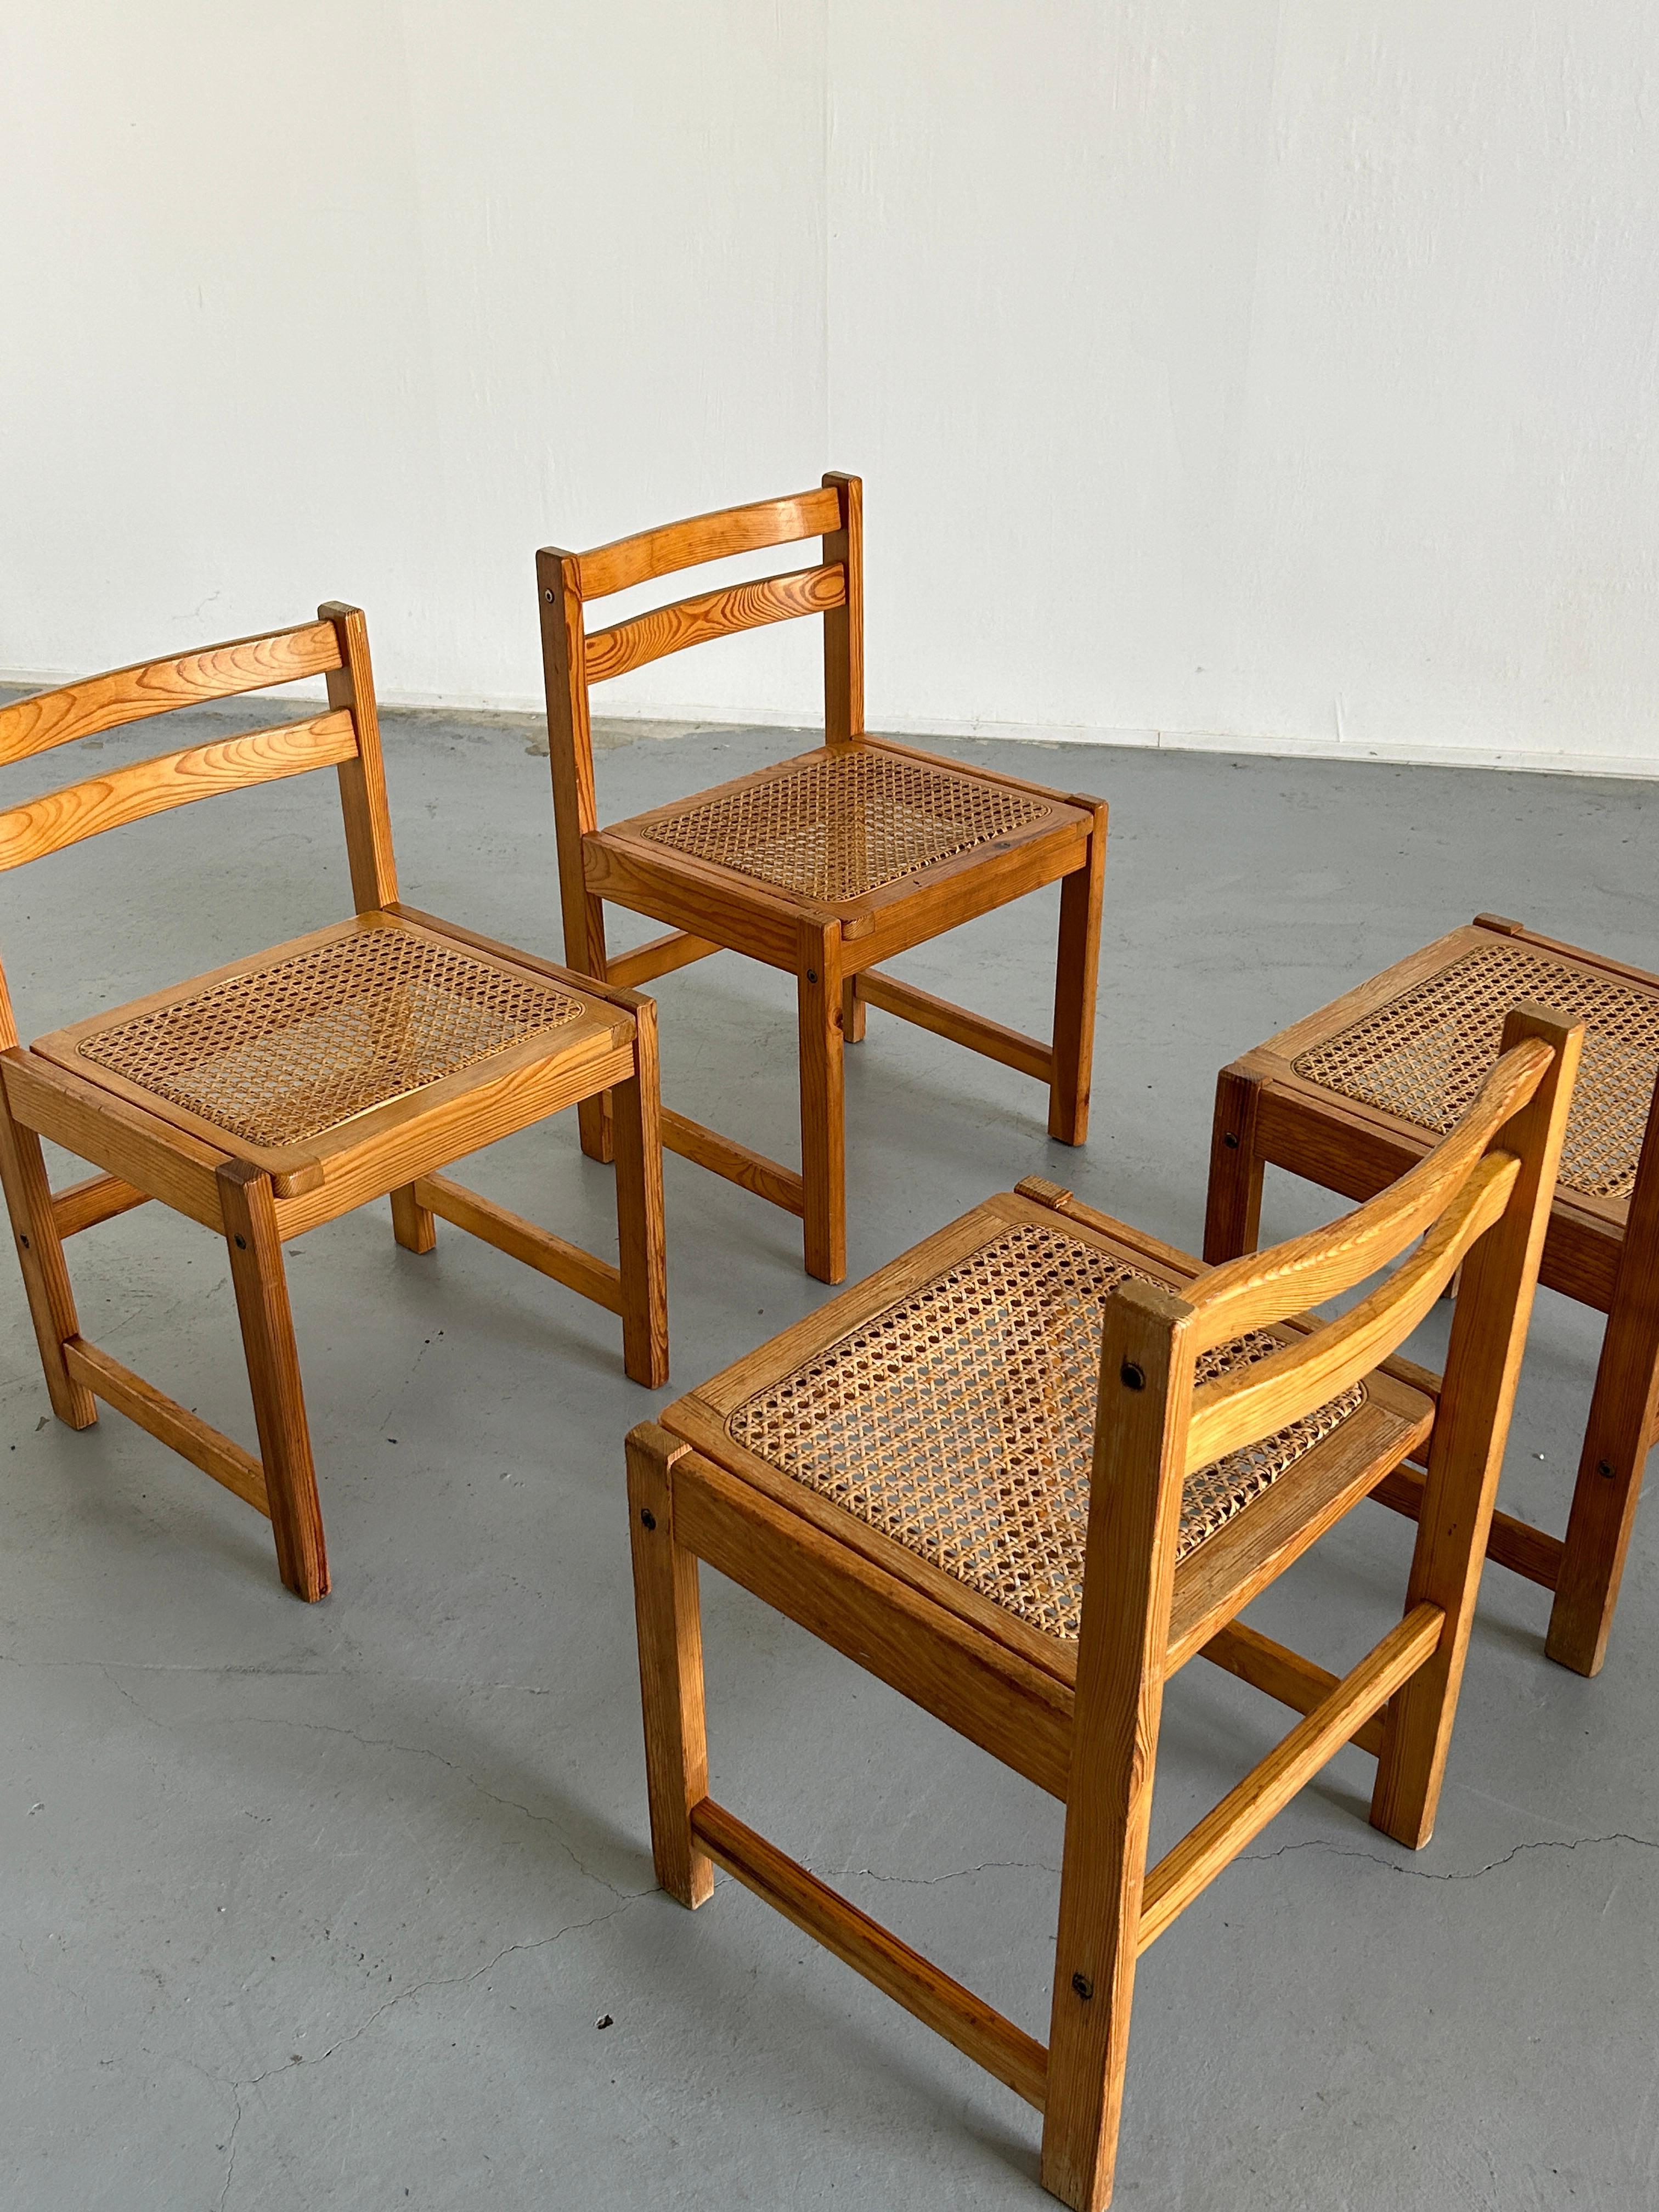 Set of 4 Vintage Mid-Century Modern Wooden Dining Chairs in Beech and Cane, 60s 7